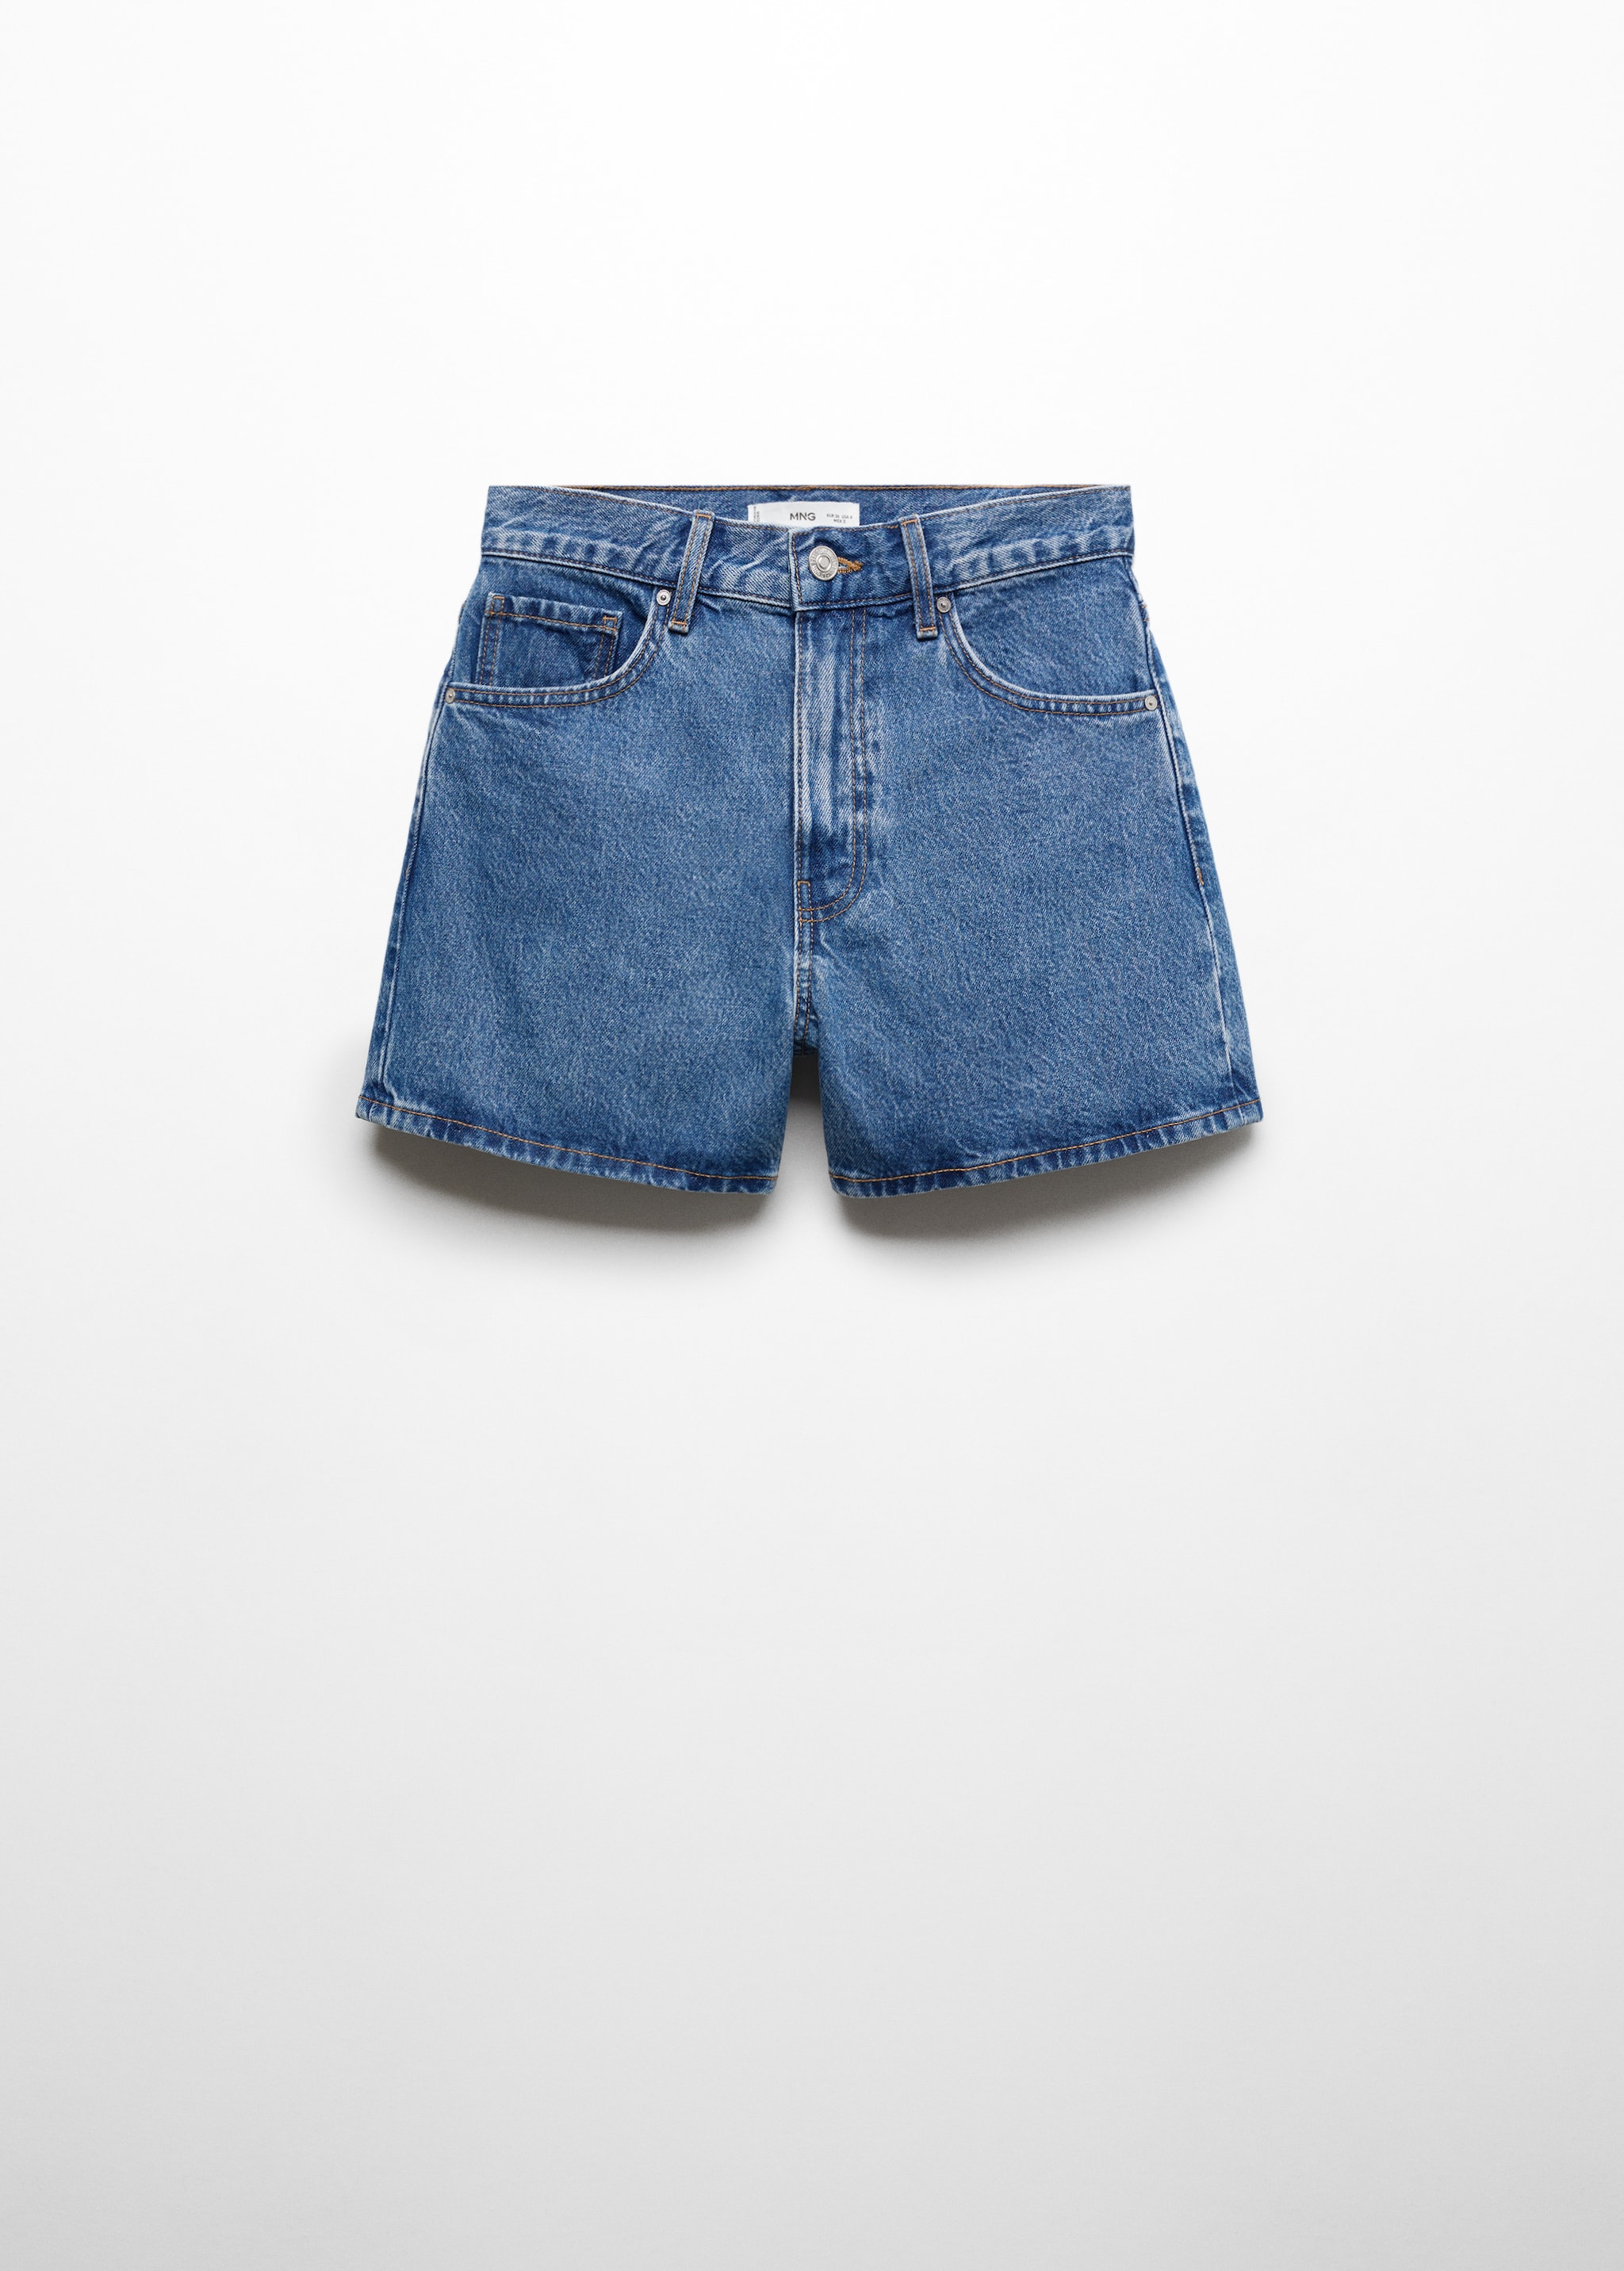 Jeans-Shorts mit hoher Taille - Artikel ohne Model